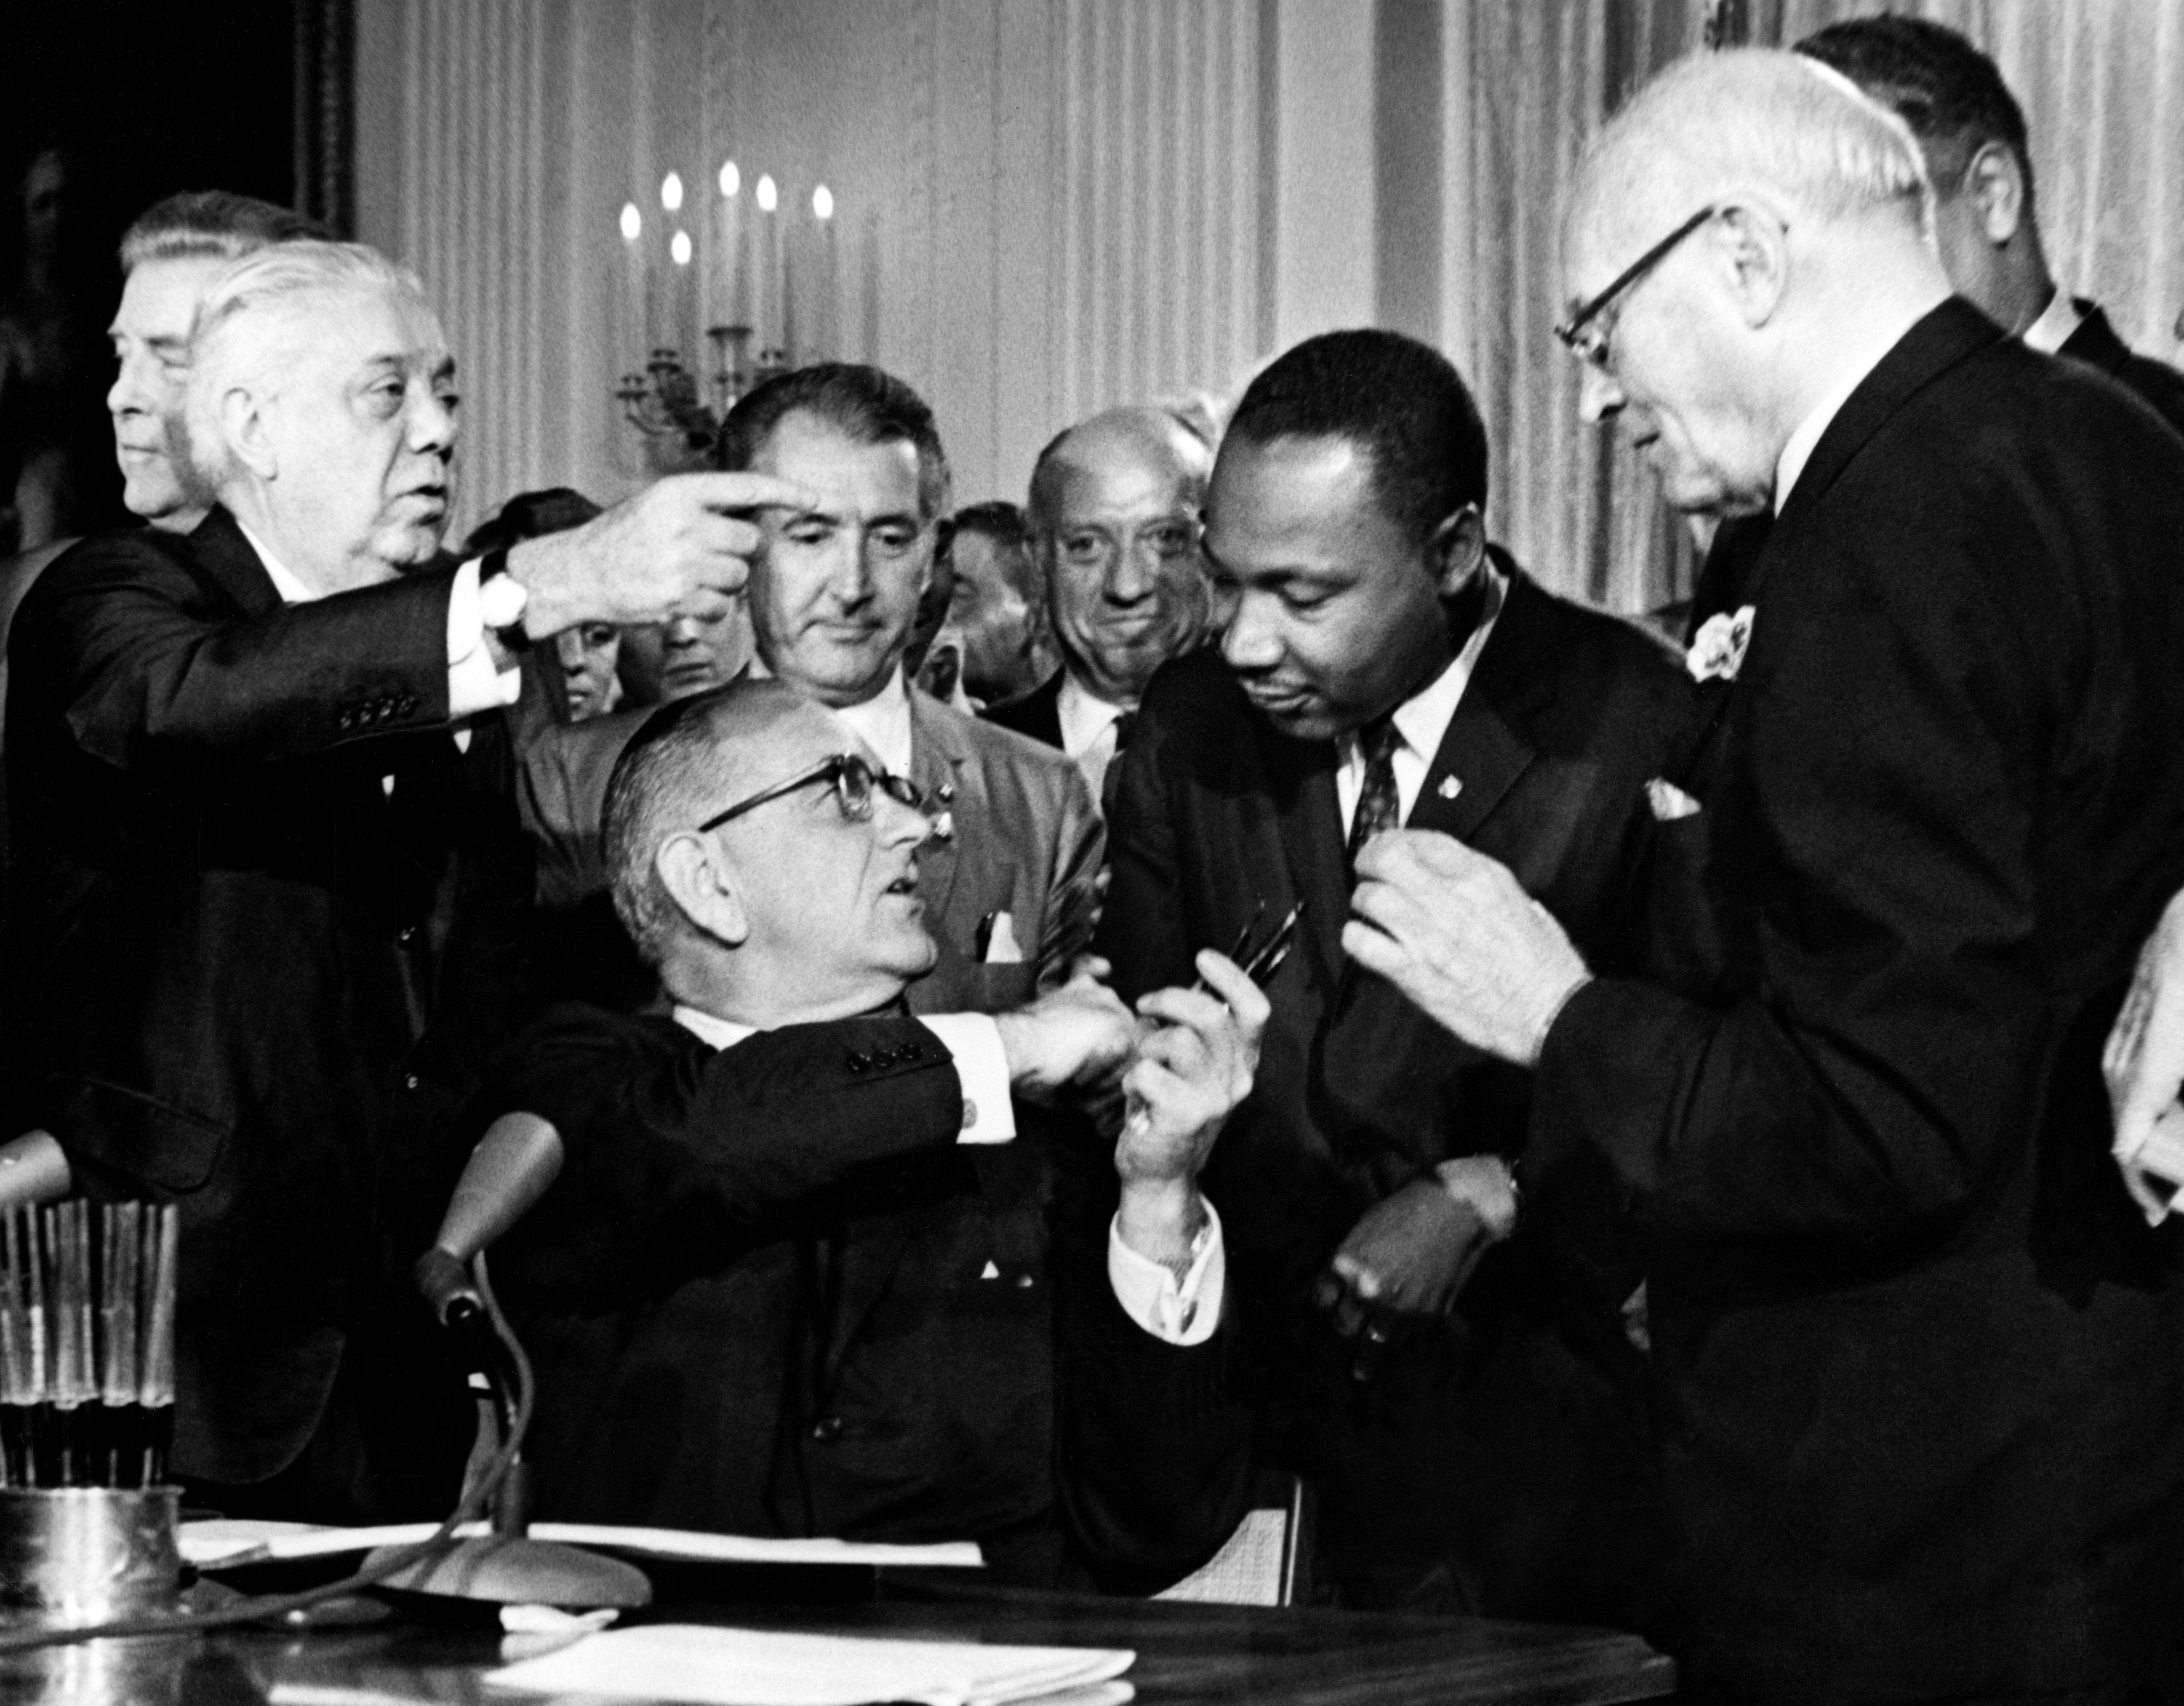 Looking forward and back as the Civil Rights Act turns 60